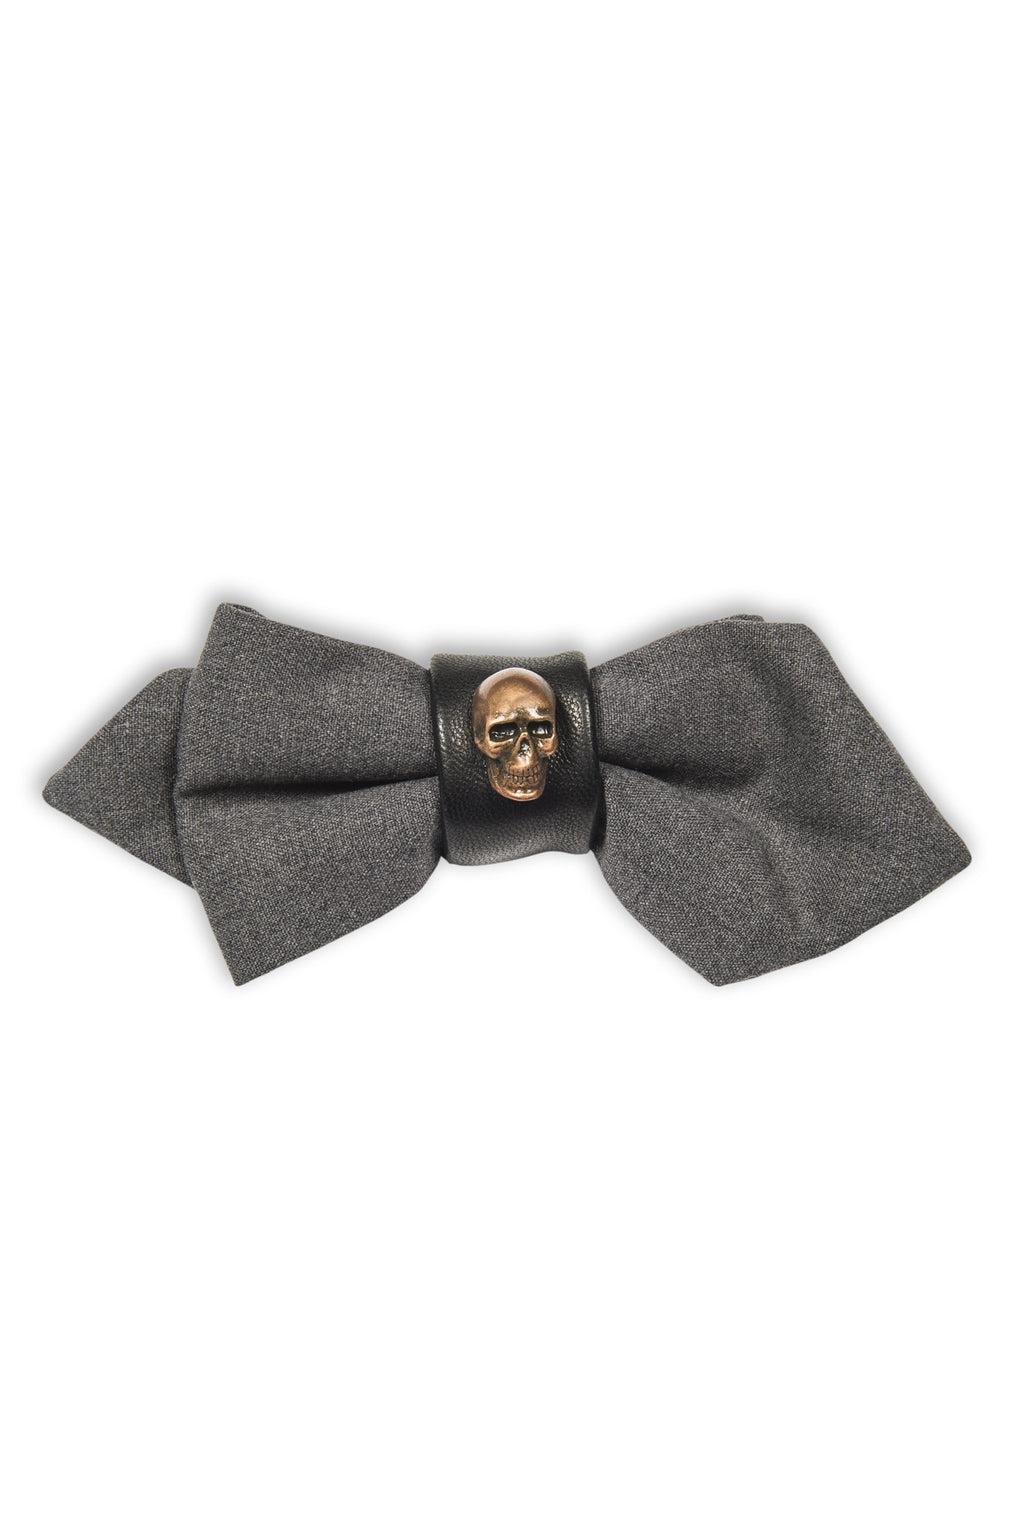 Noeud papillon avec cuir et tête de mort - Grey wool bow tie with leather and skull 